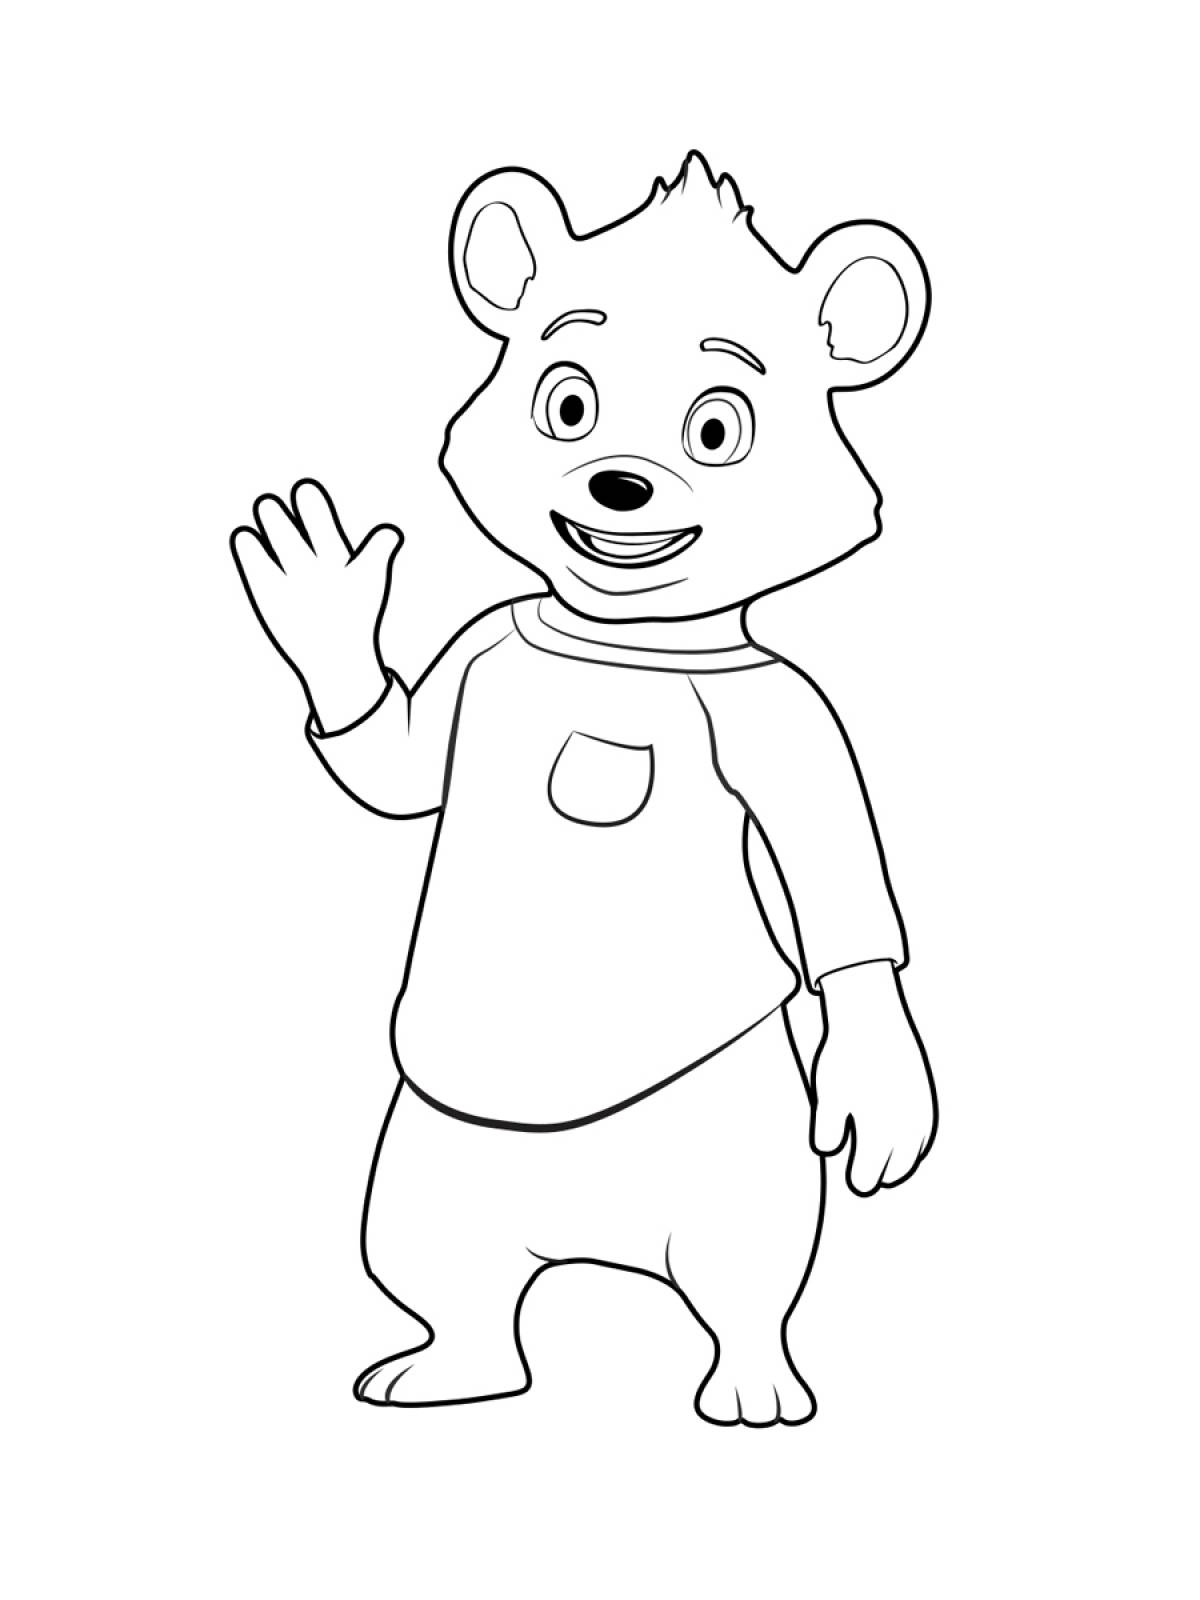 Goldie and bear coloring pages